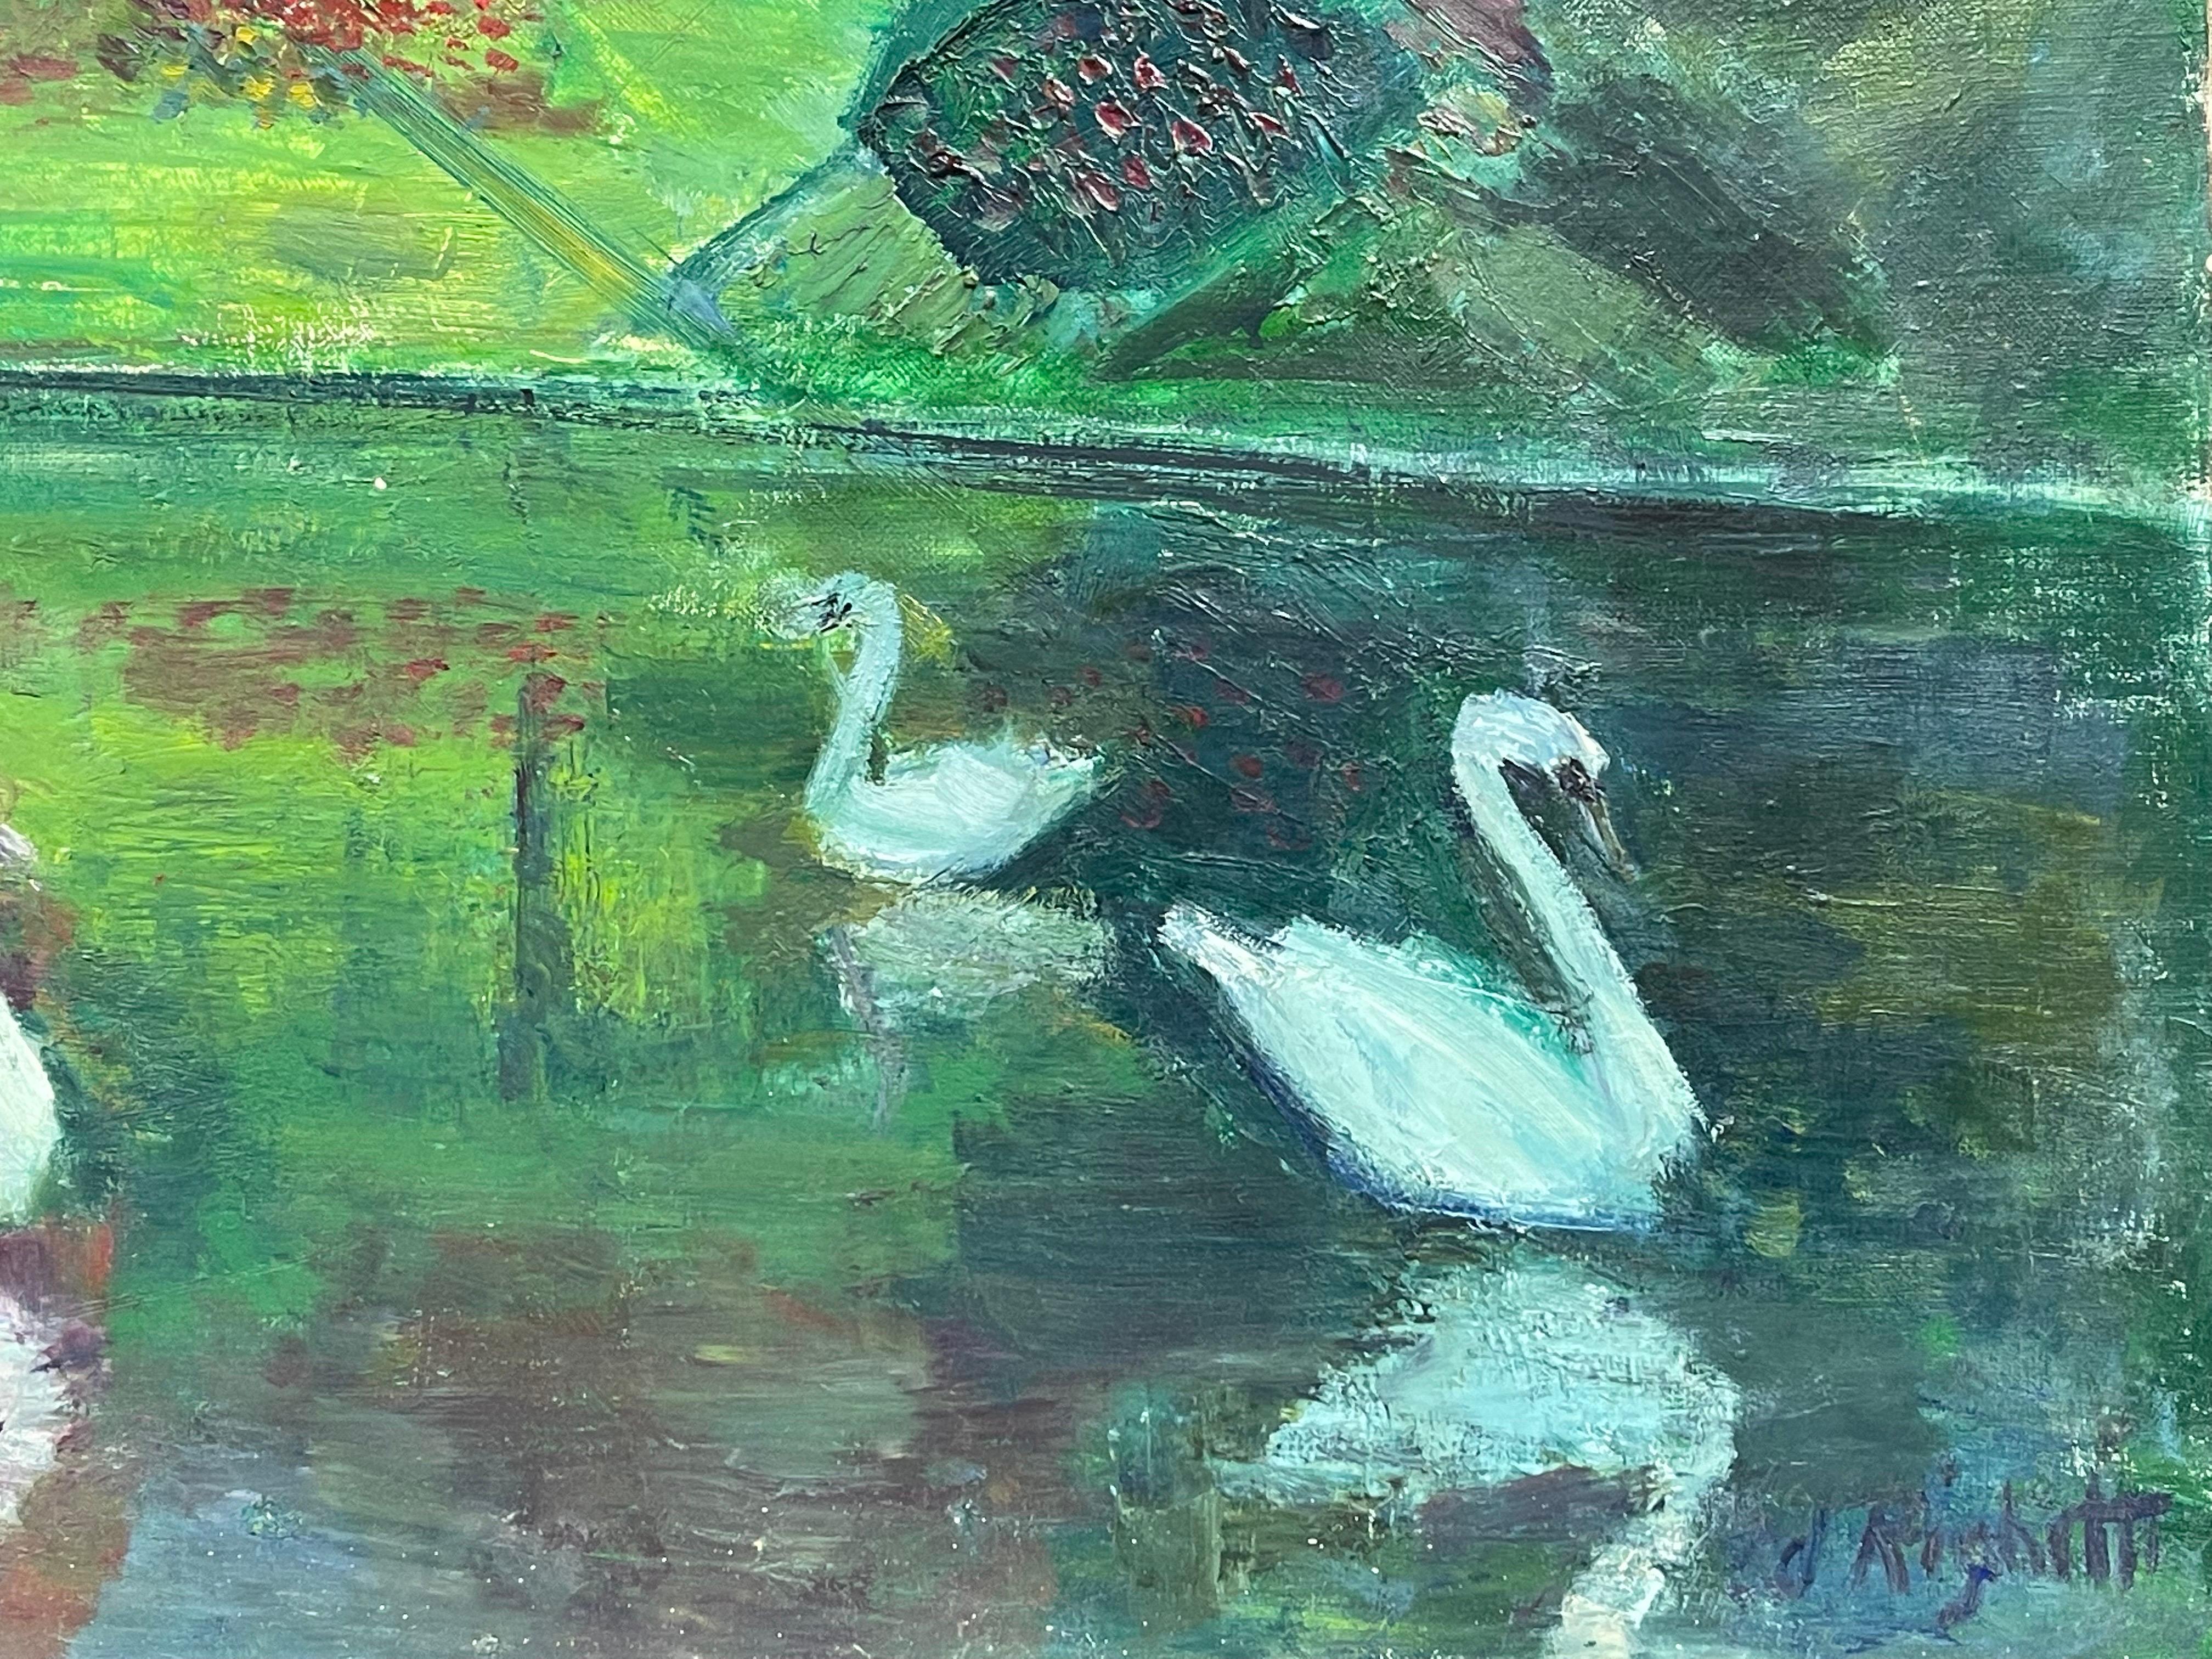 Original French Mid Century Oil - Vibrant Green Lake With Elegant Swans - Post-Impressionist Painting by Édouard Righetti (1924-2001)